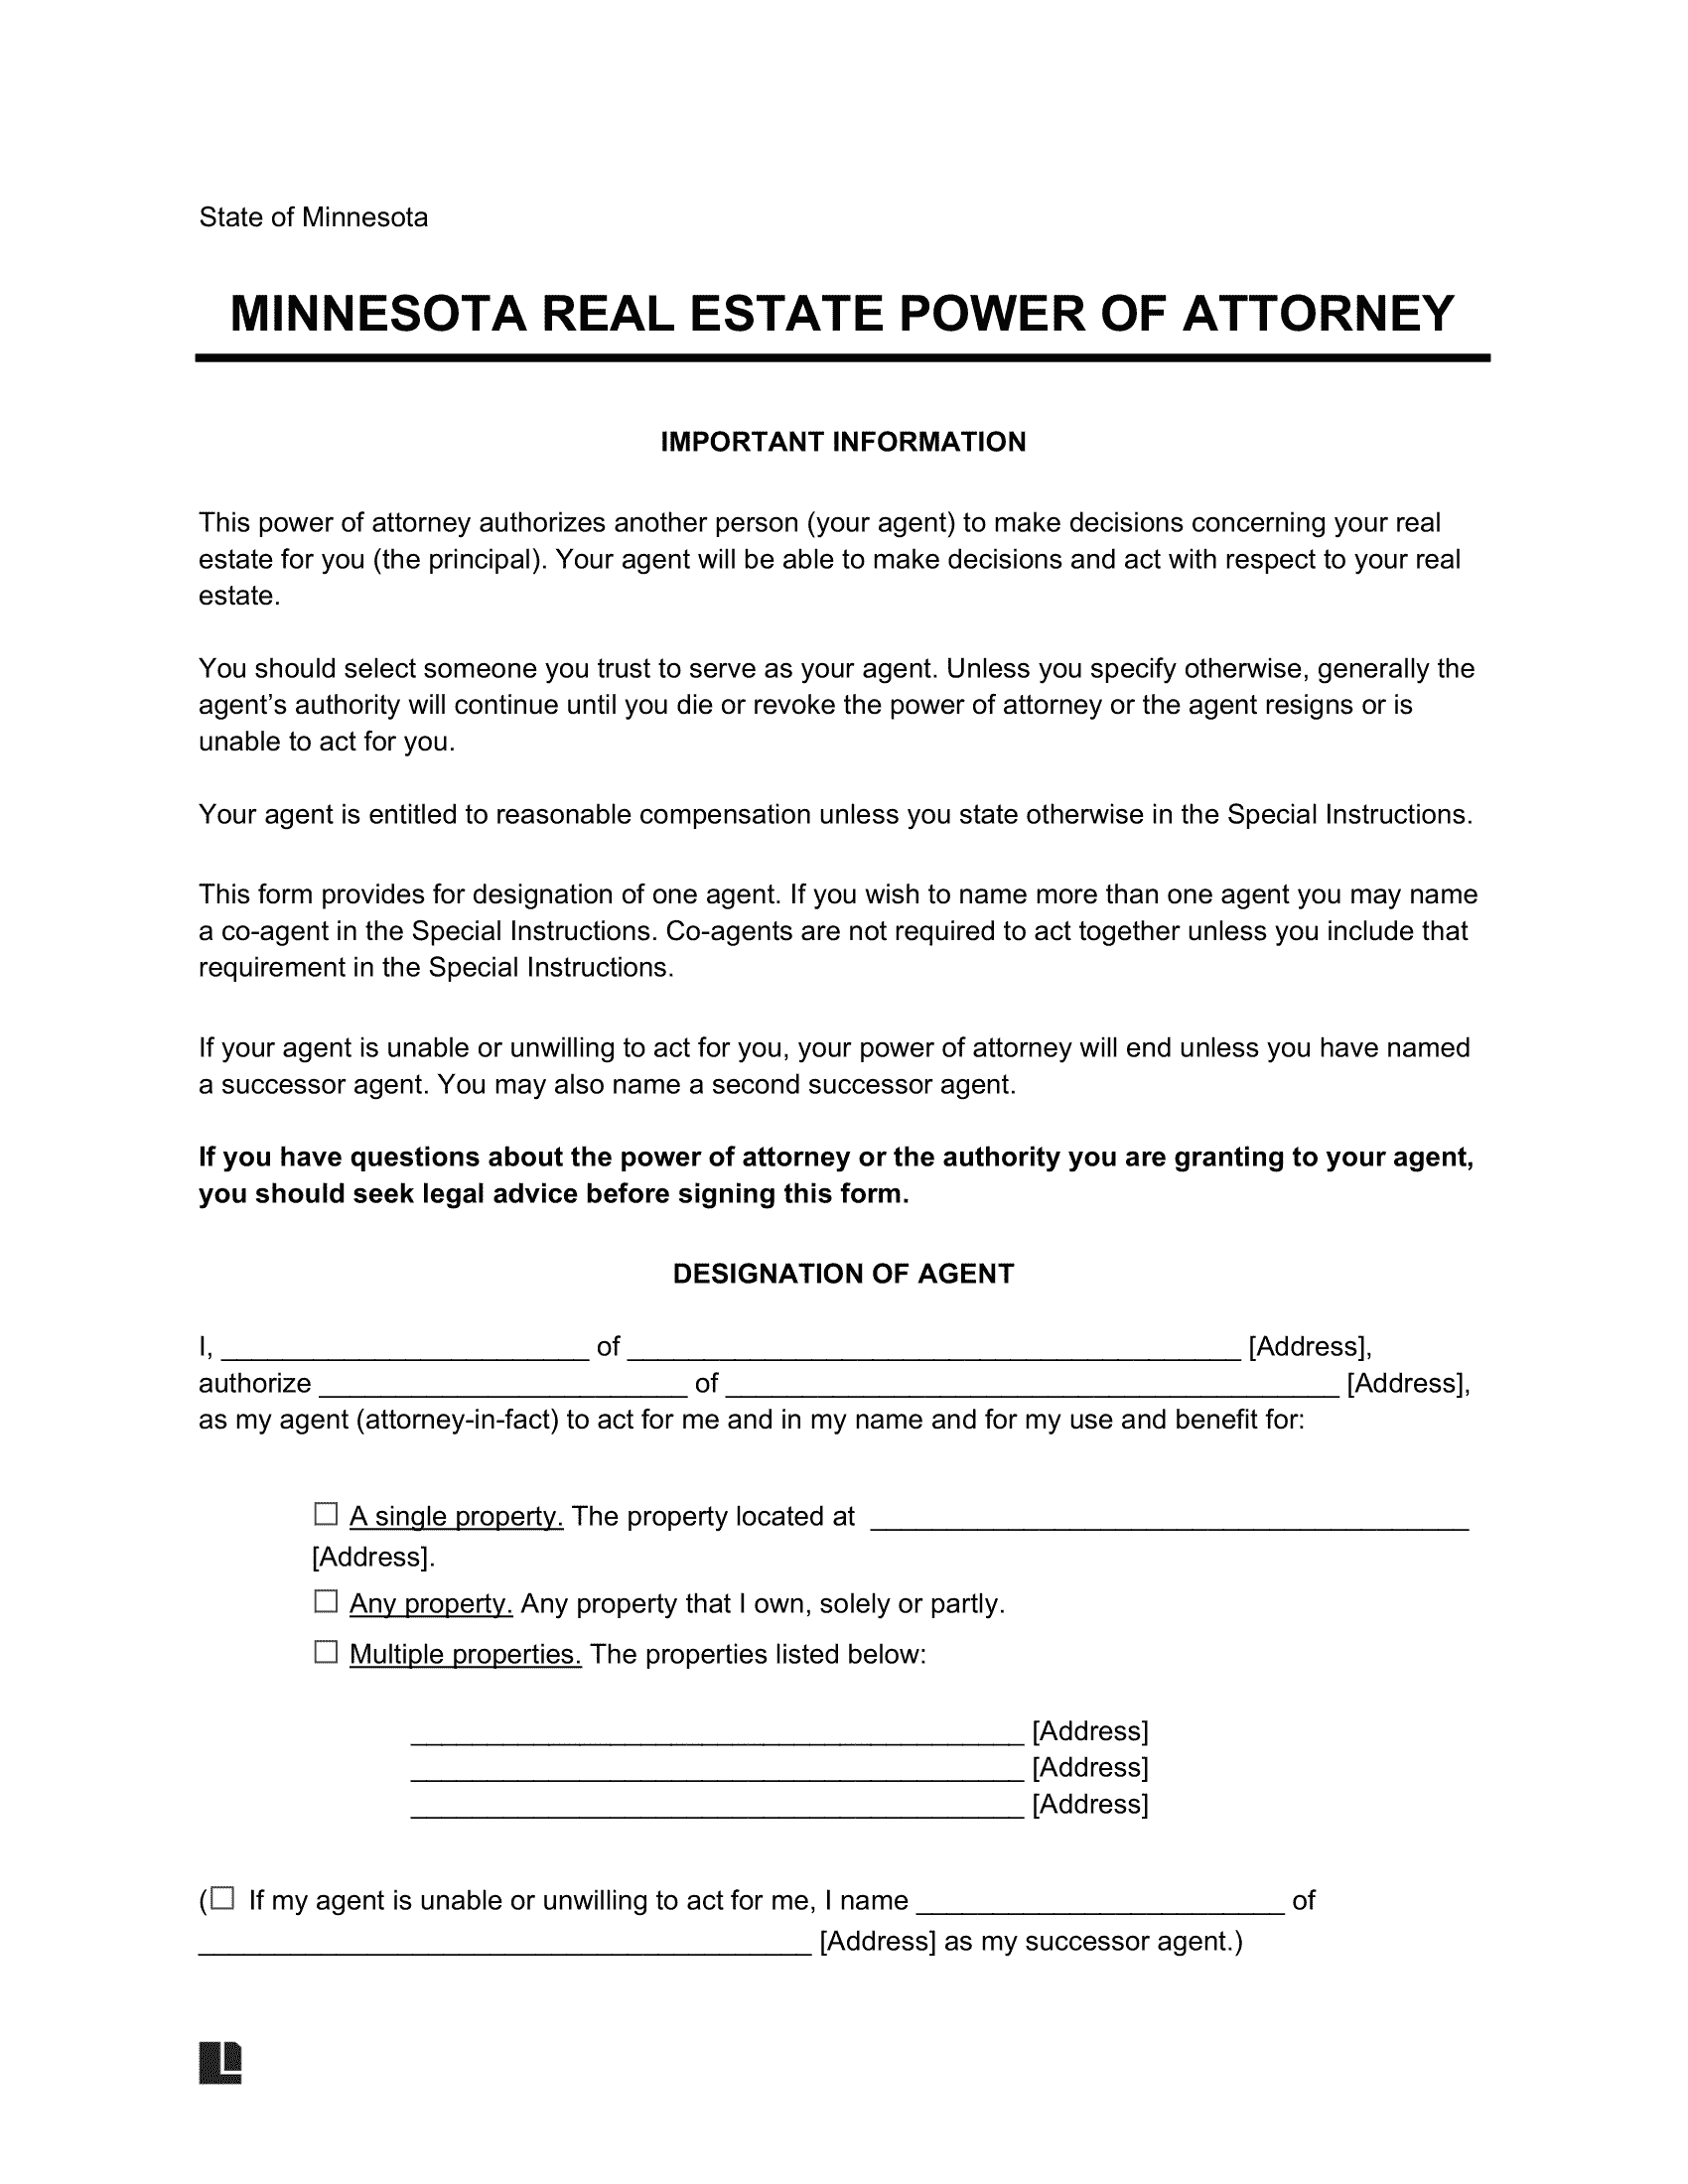 Minnesota Real Estate Power of Attorney Form